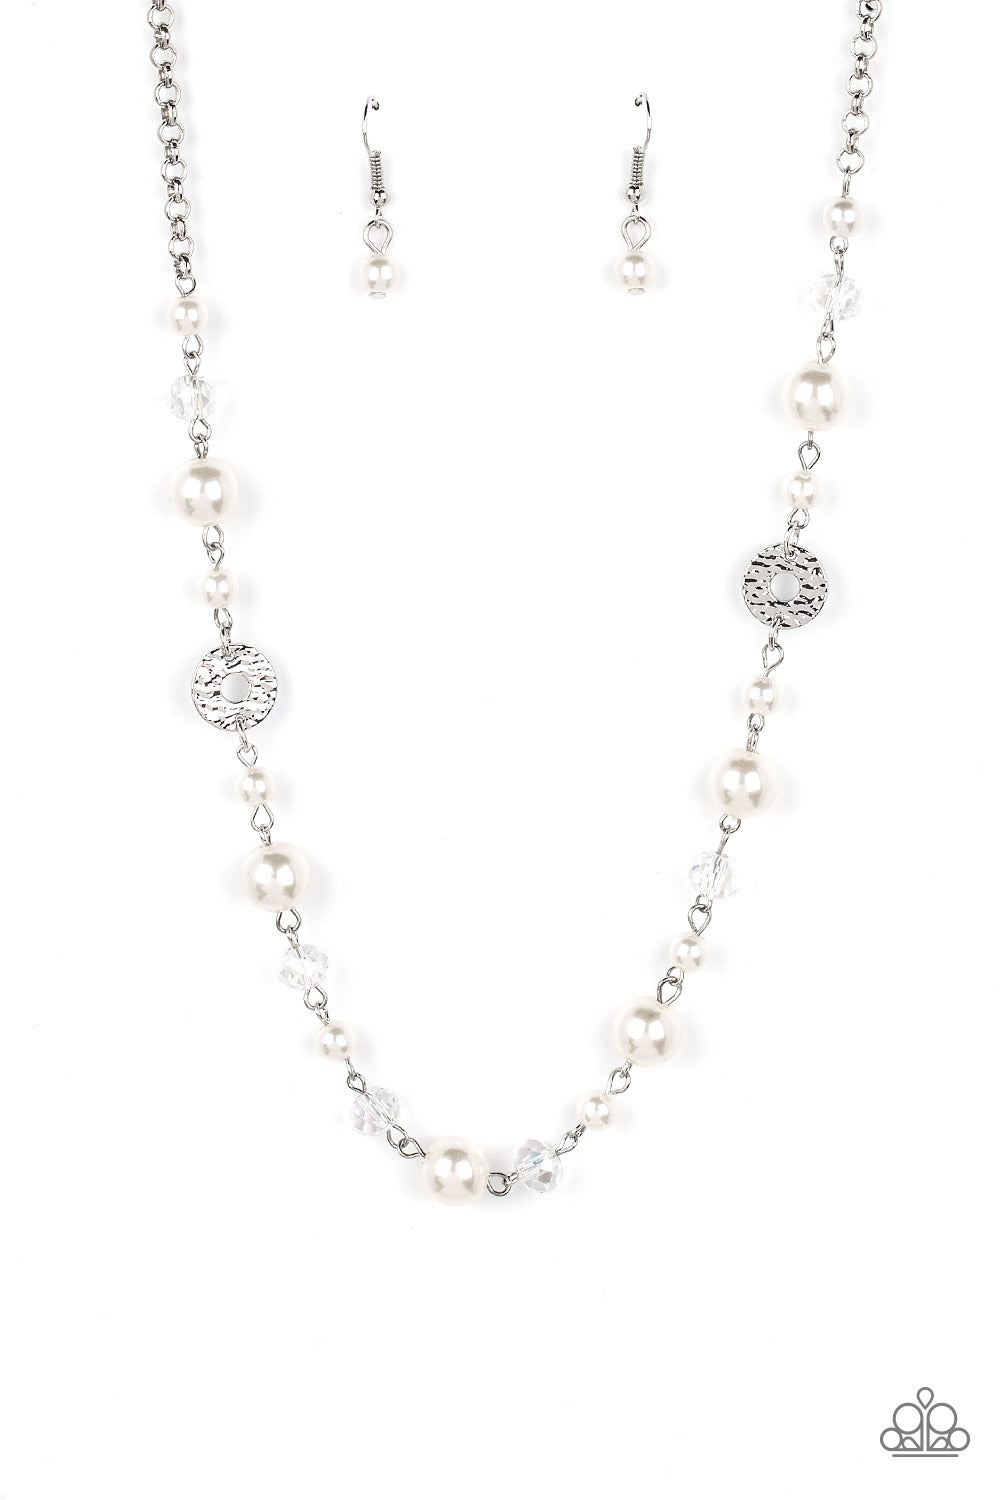 Traditional Transcendence Paparazzi Accessories Necklace with Earrings - White